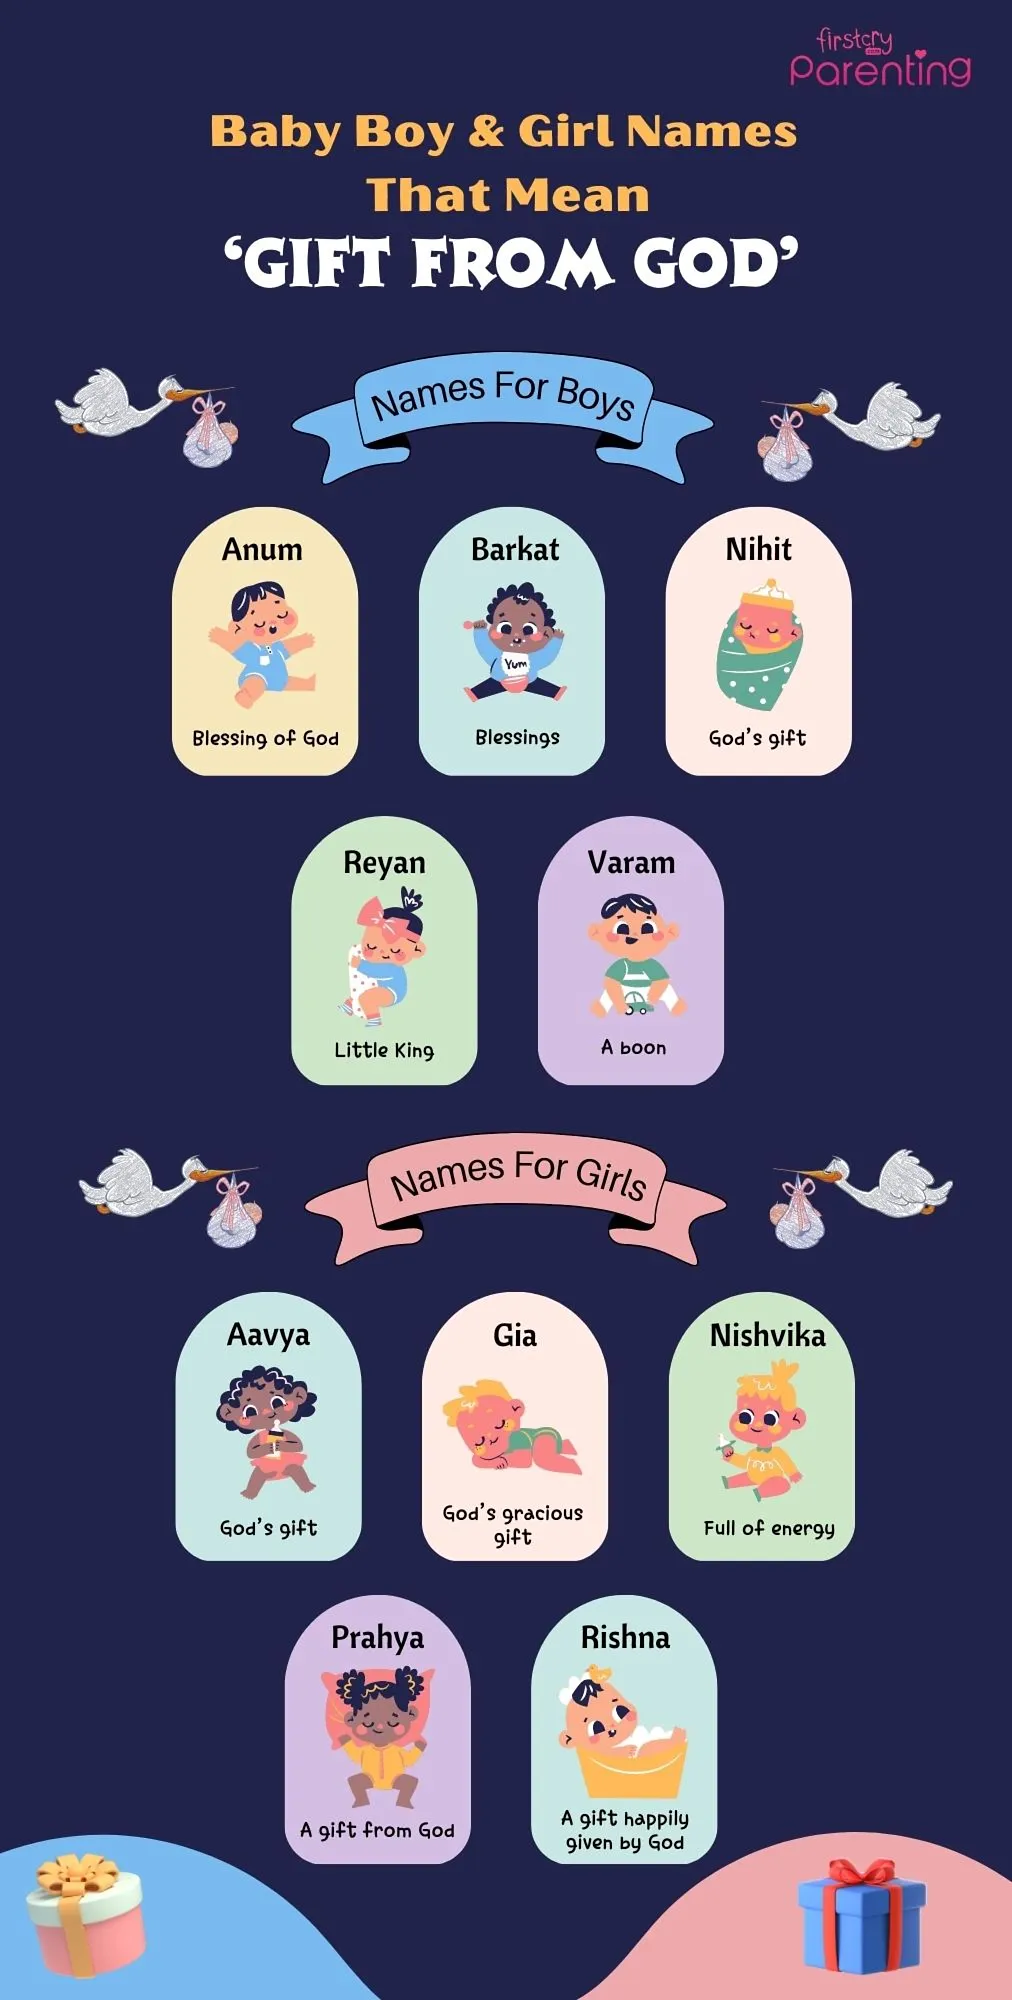 Infographic: Baby Boy & Girl Names That Mean ‘Gift from God’